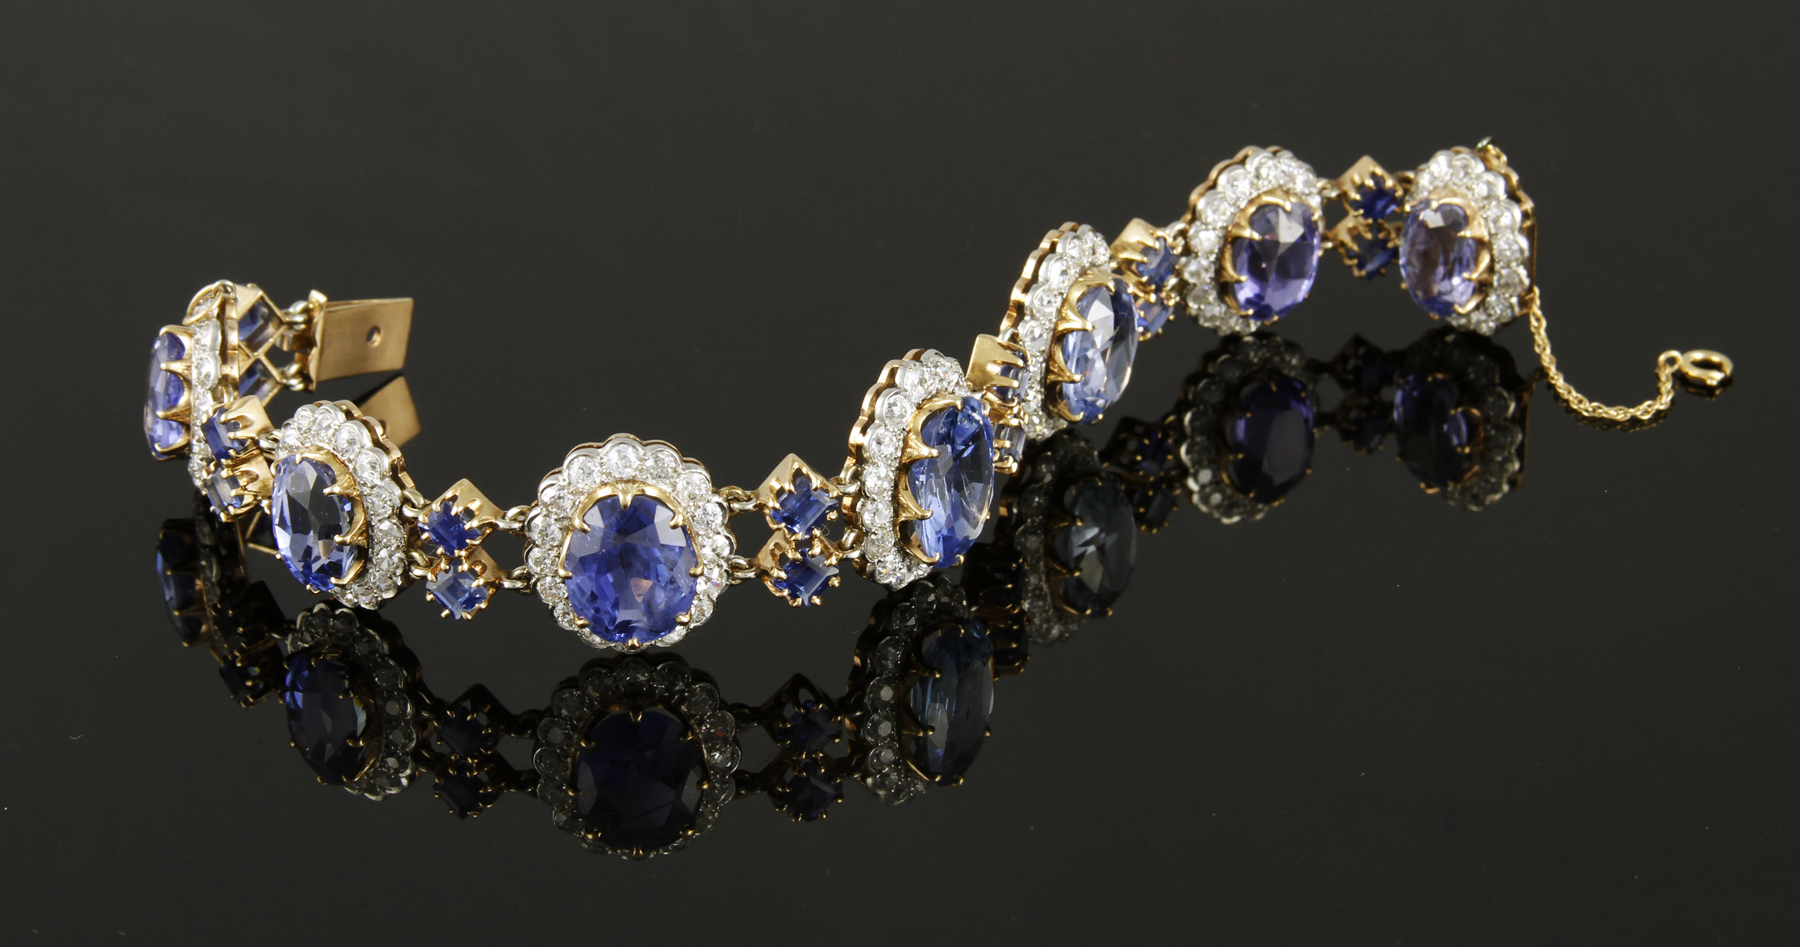 Exceptional 14K Gold, Sapphire and Diamond Bracelet